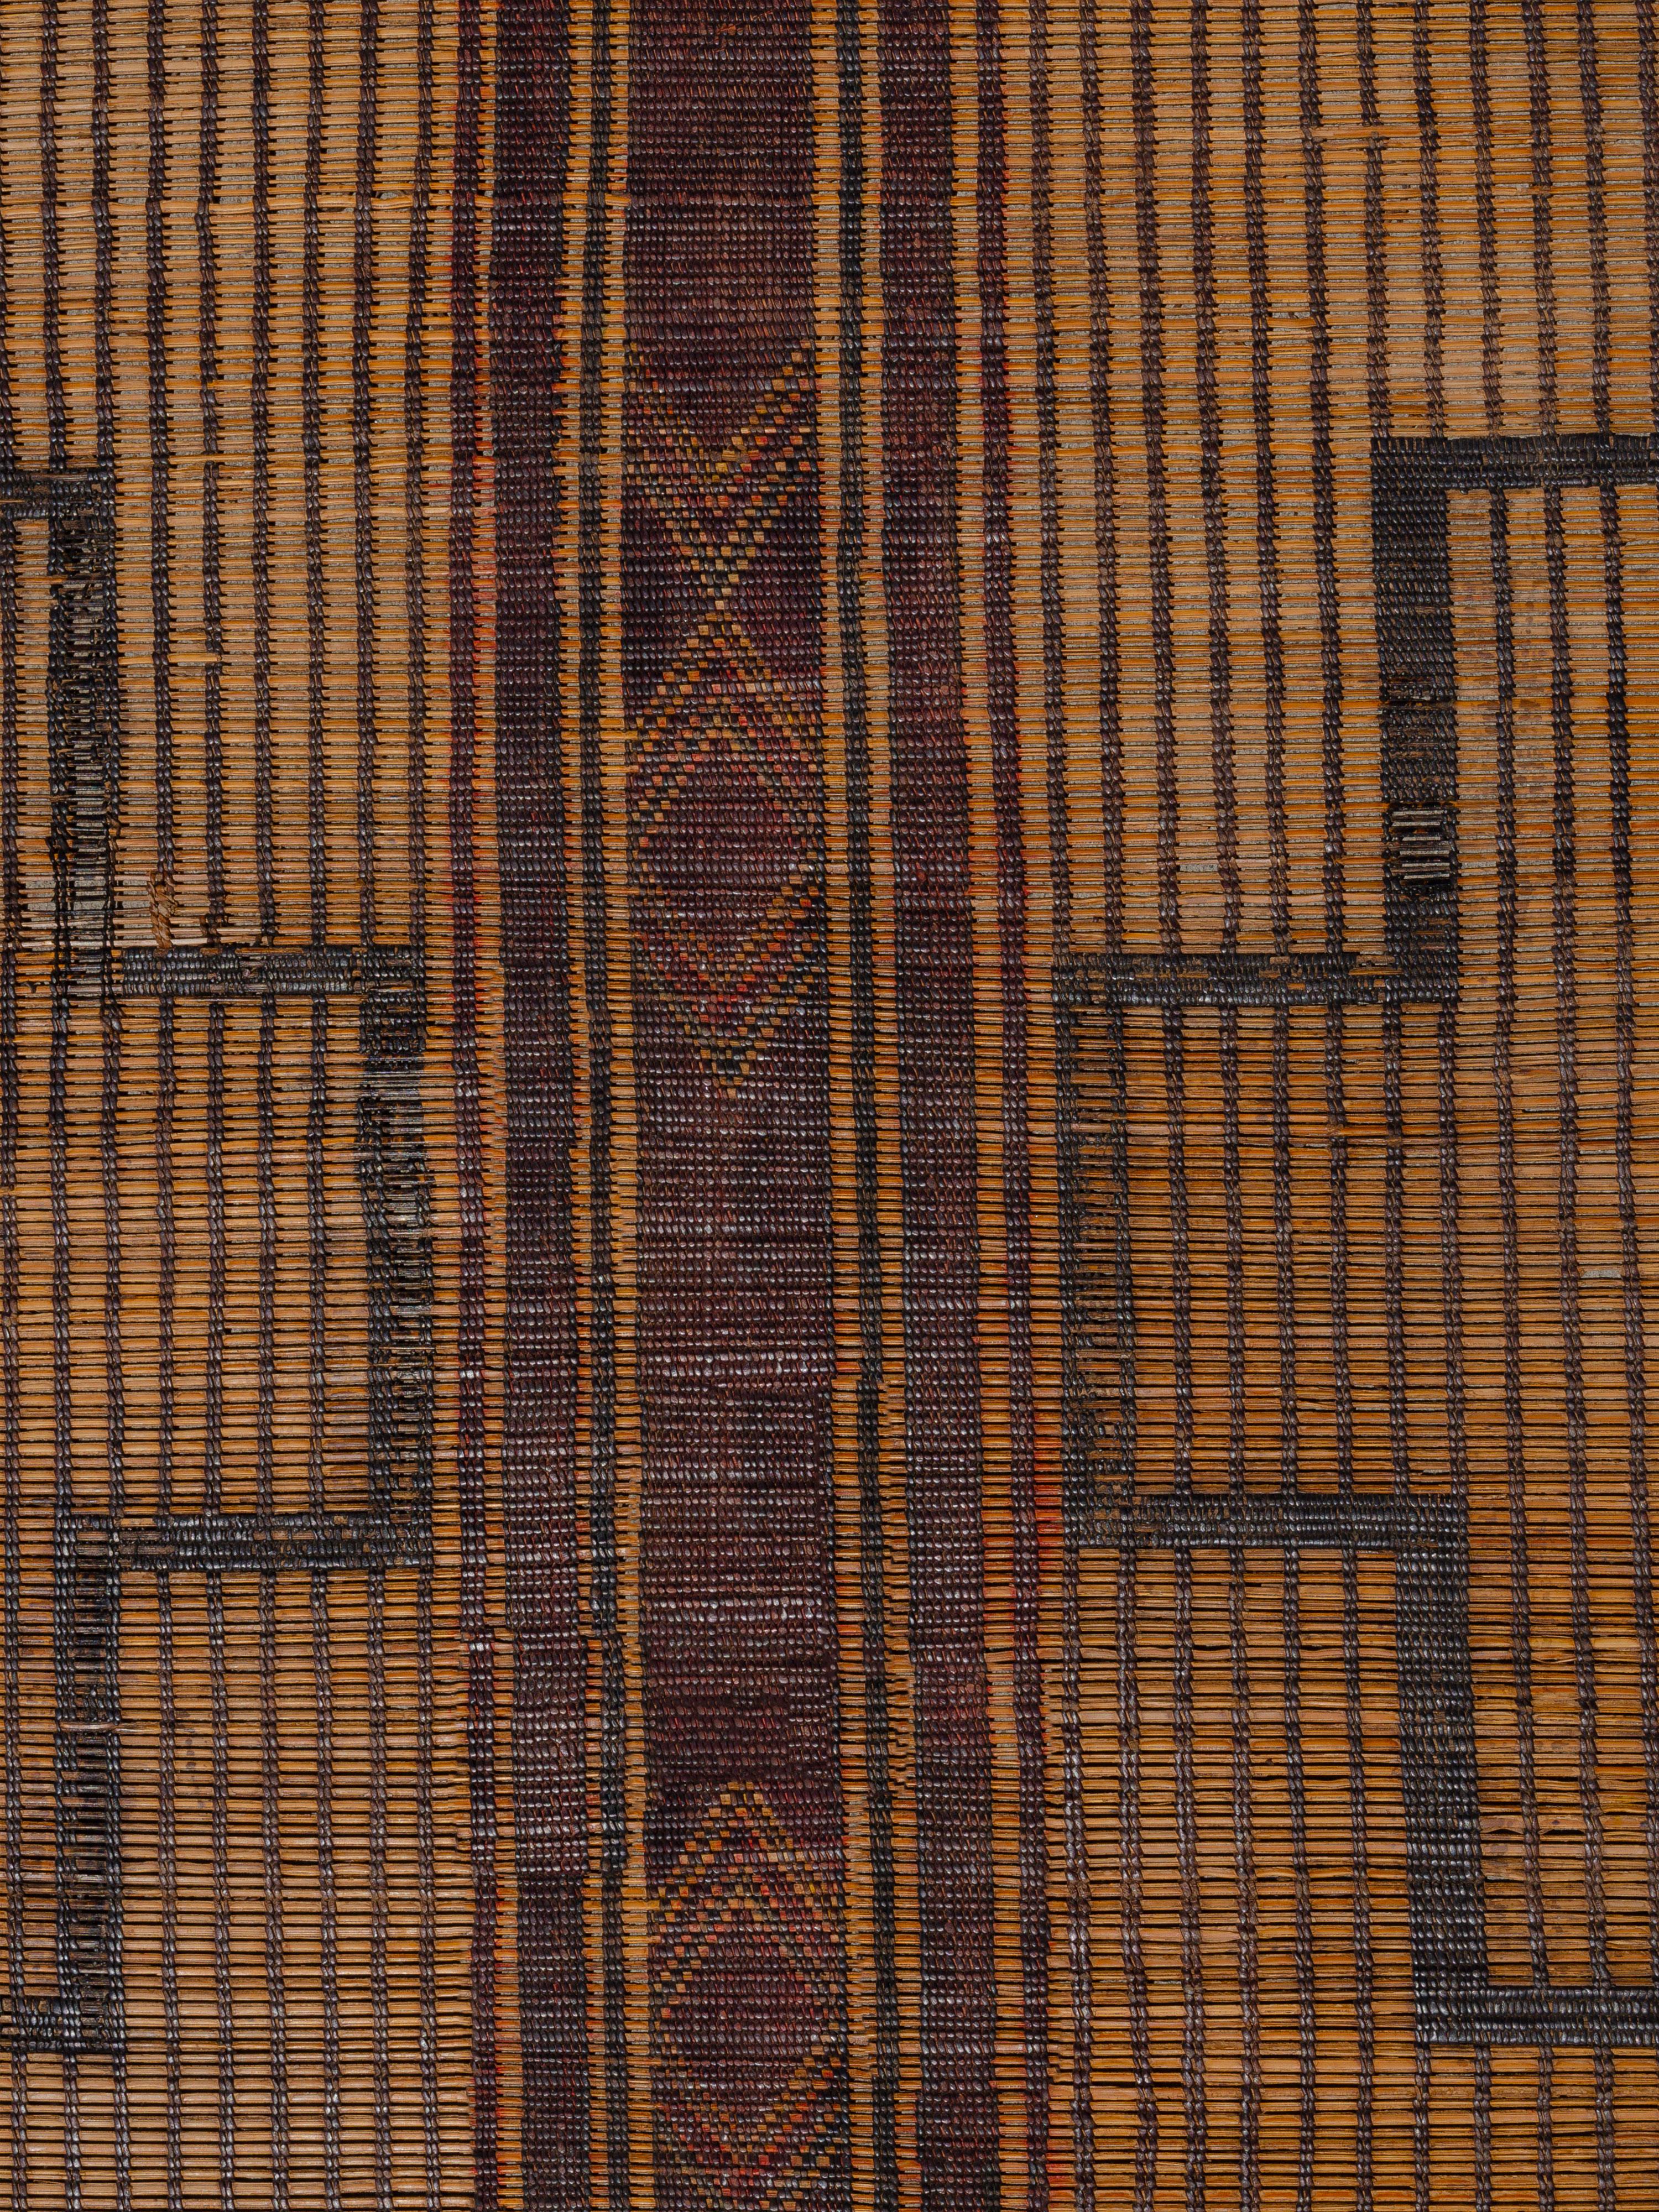 Woven by the nomadic Tuareg tribes of Mauritania with palm reed and leather, these mats offer a textural alternative to traditional woven textile floor coverings. This piece exhibits a rather symmetrical composition of prominent cross motifs